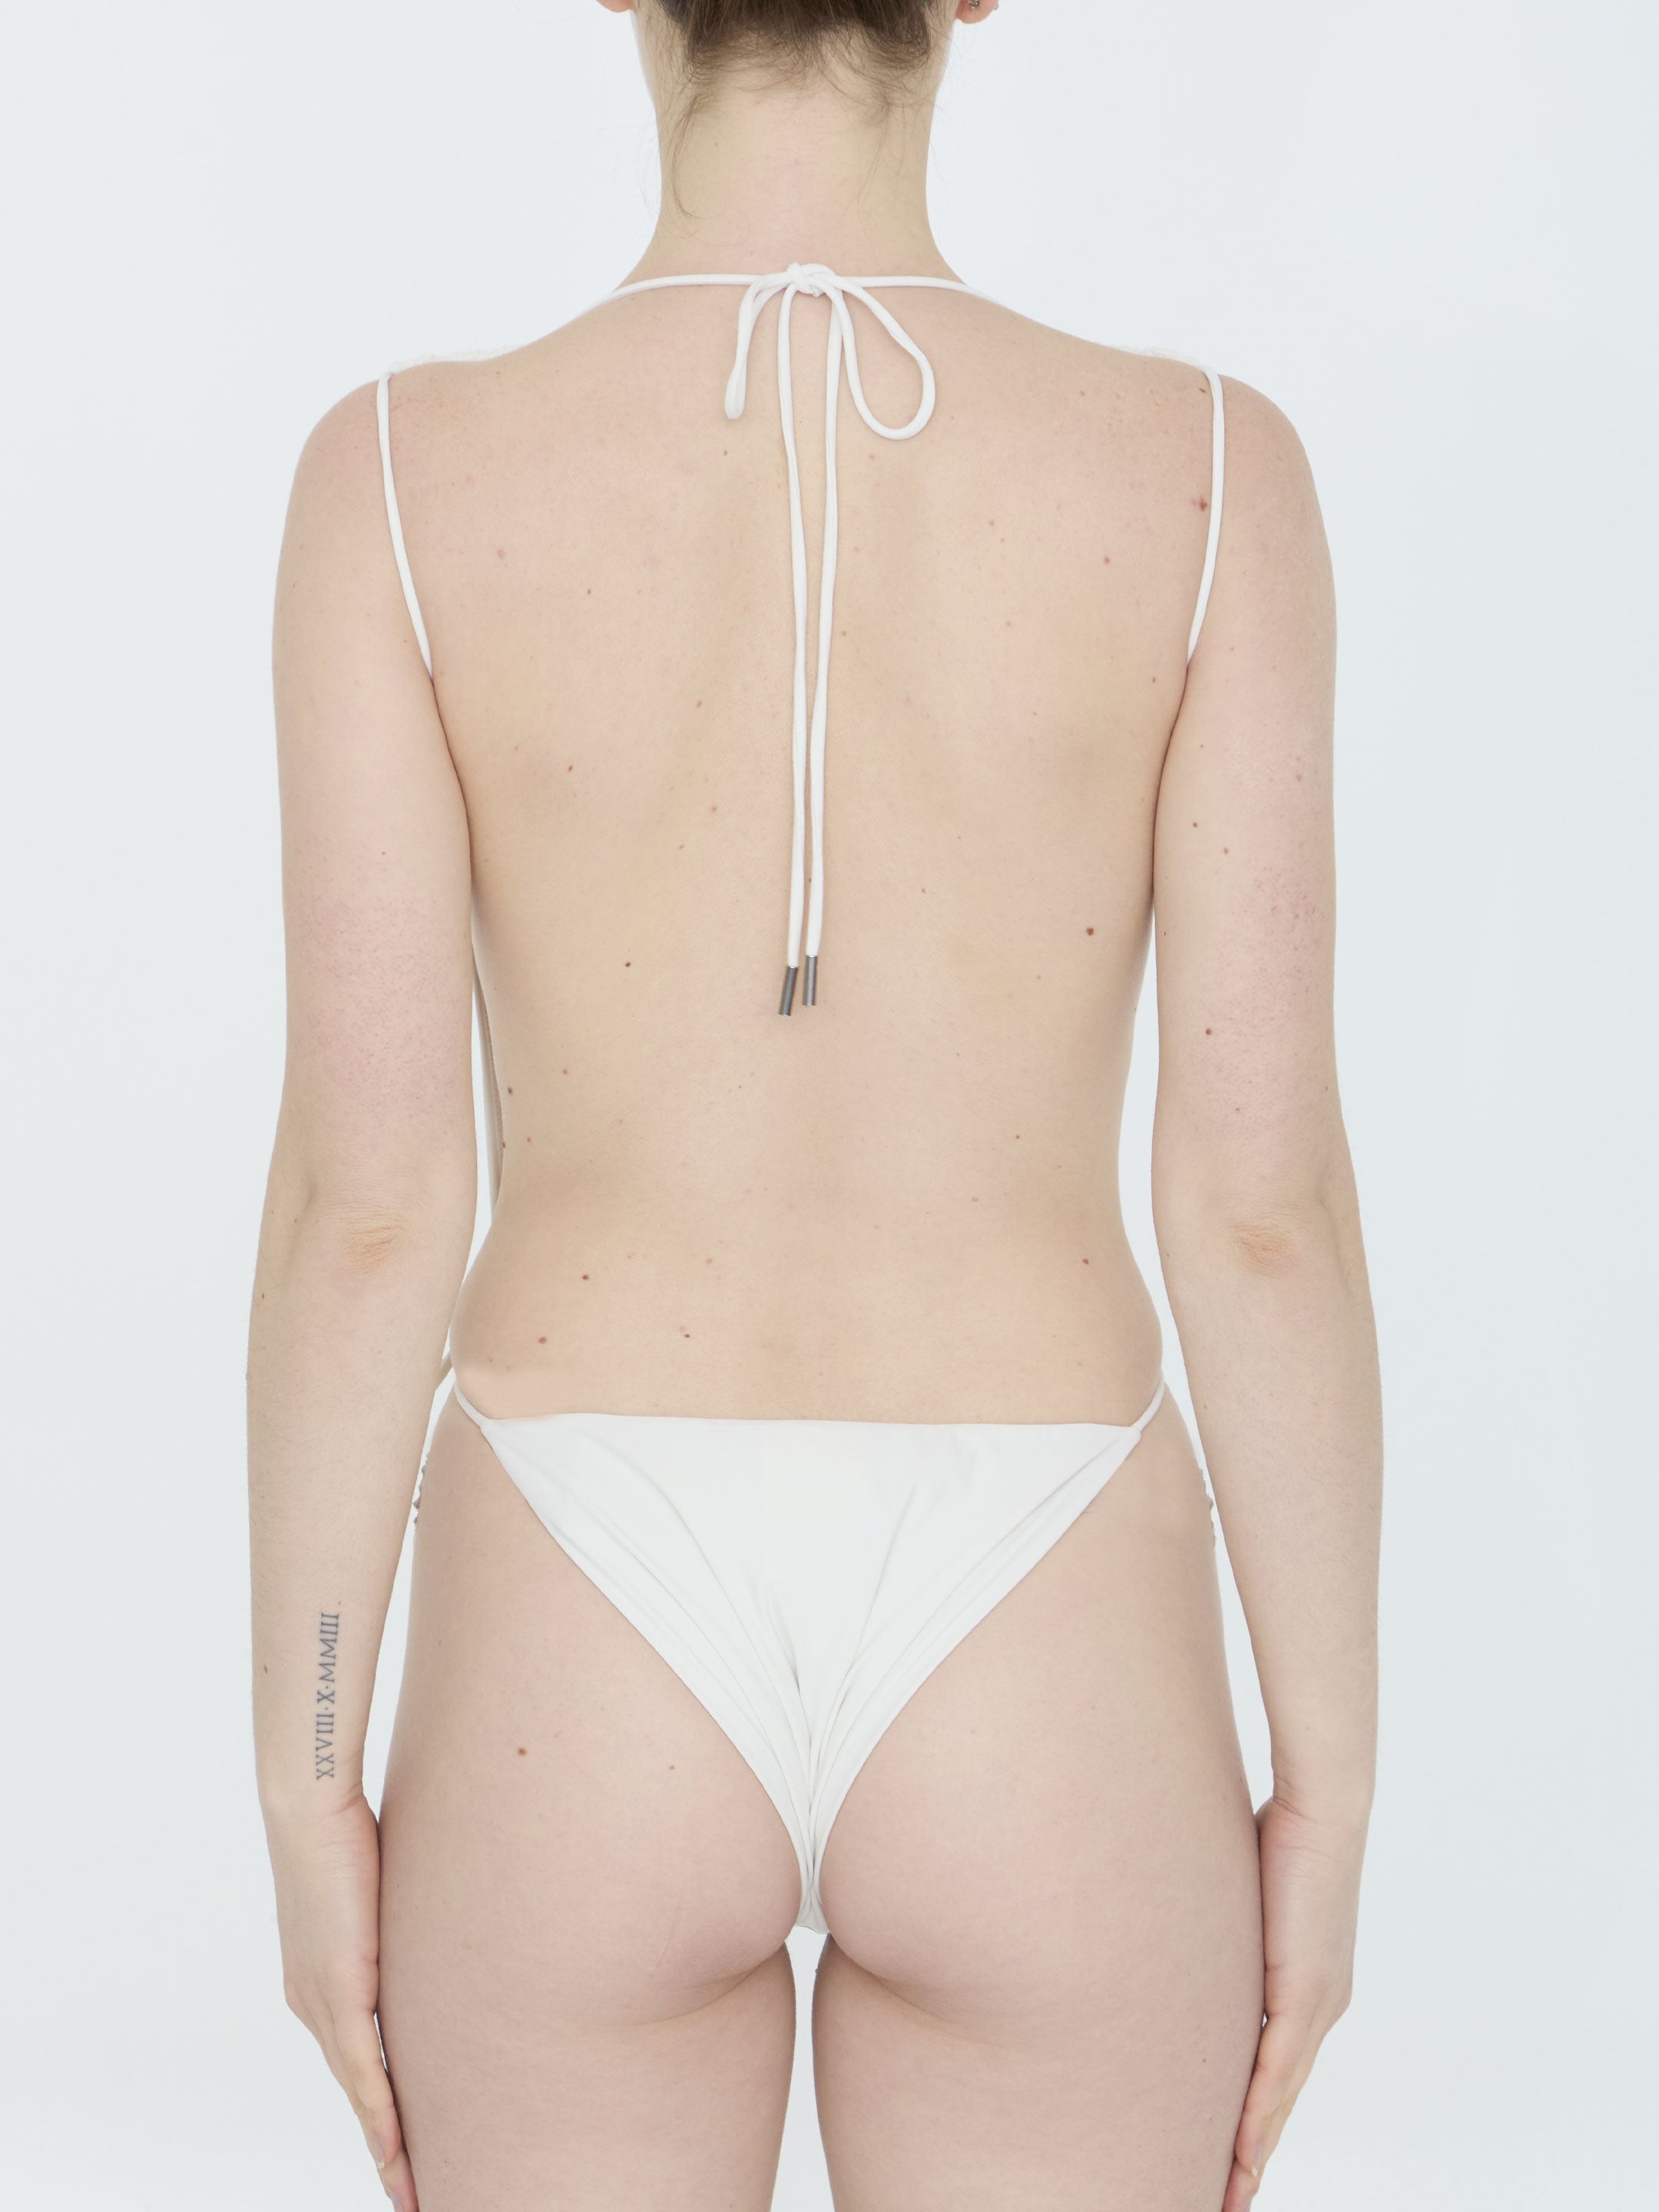 SAINT-LAURENT-OUTLET-SALE-One-piece-swimsuit-Badebekleidung-ARCHIVE-COLLECTION-4.jpg